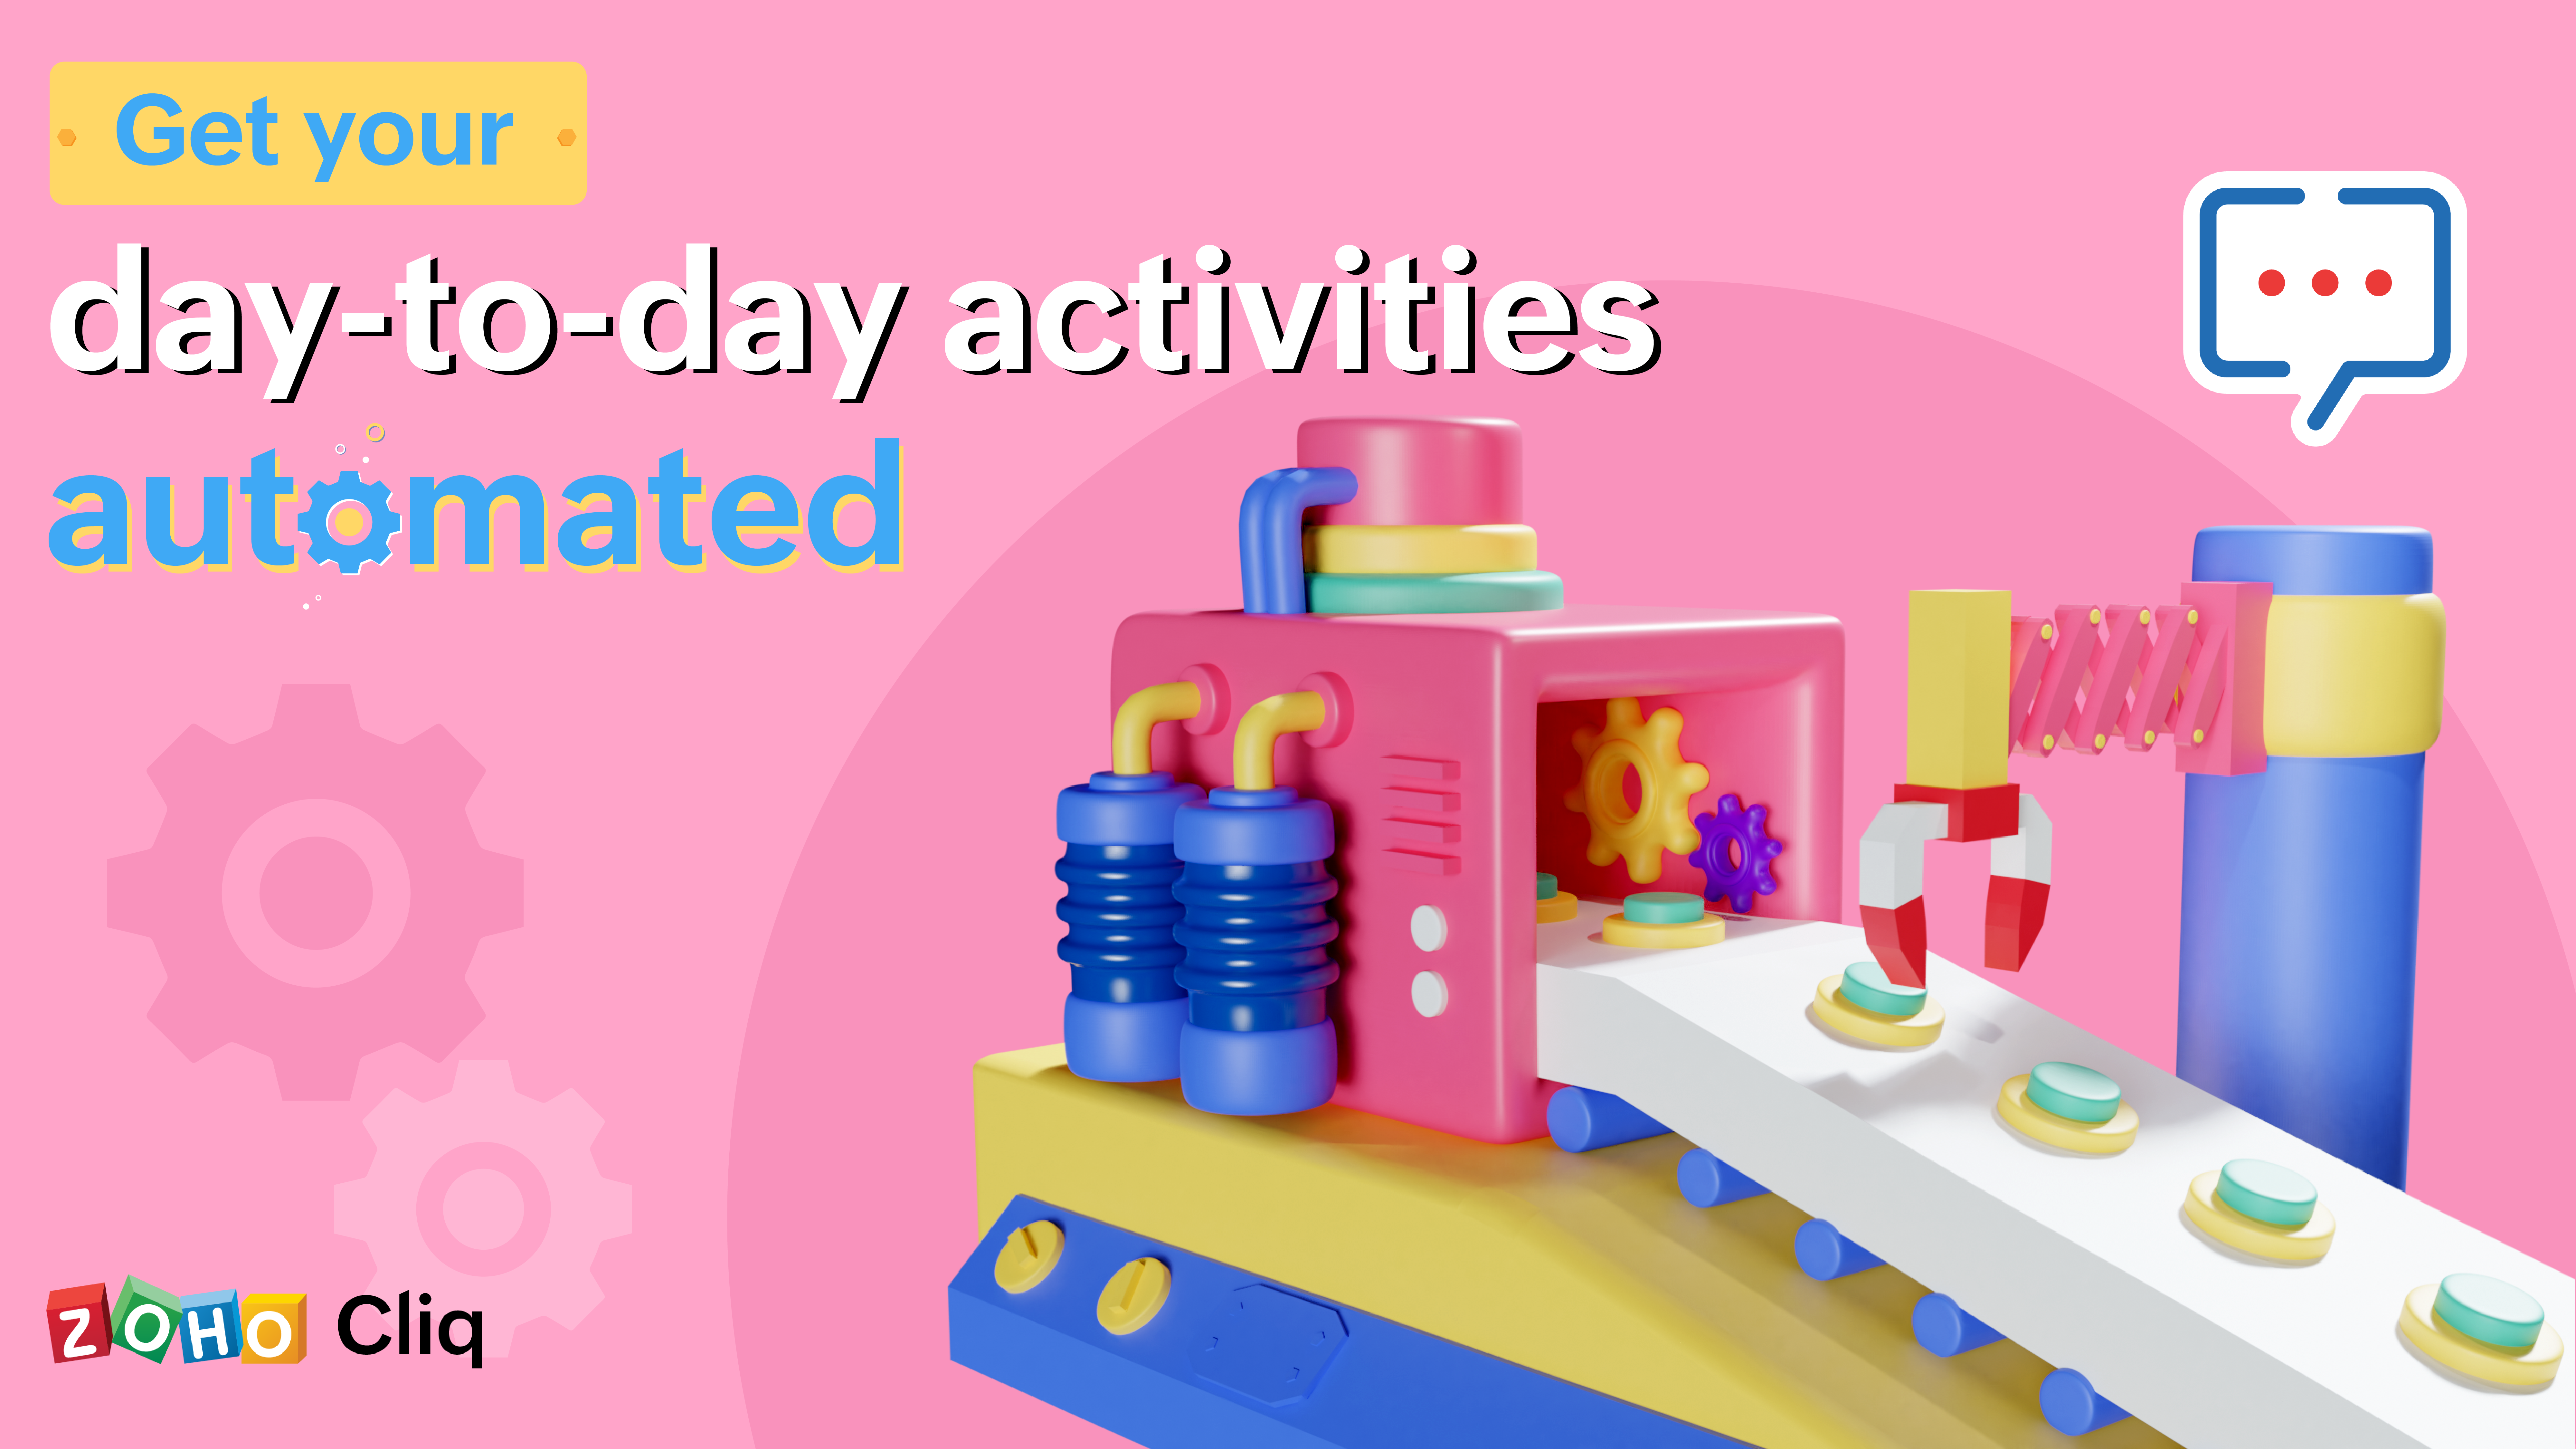 Automating your day-to-day activities: Why it's helpful and how you can do it